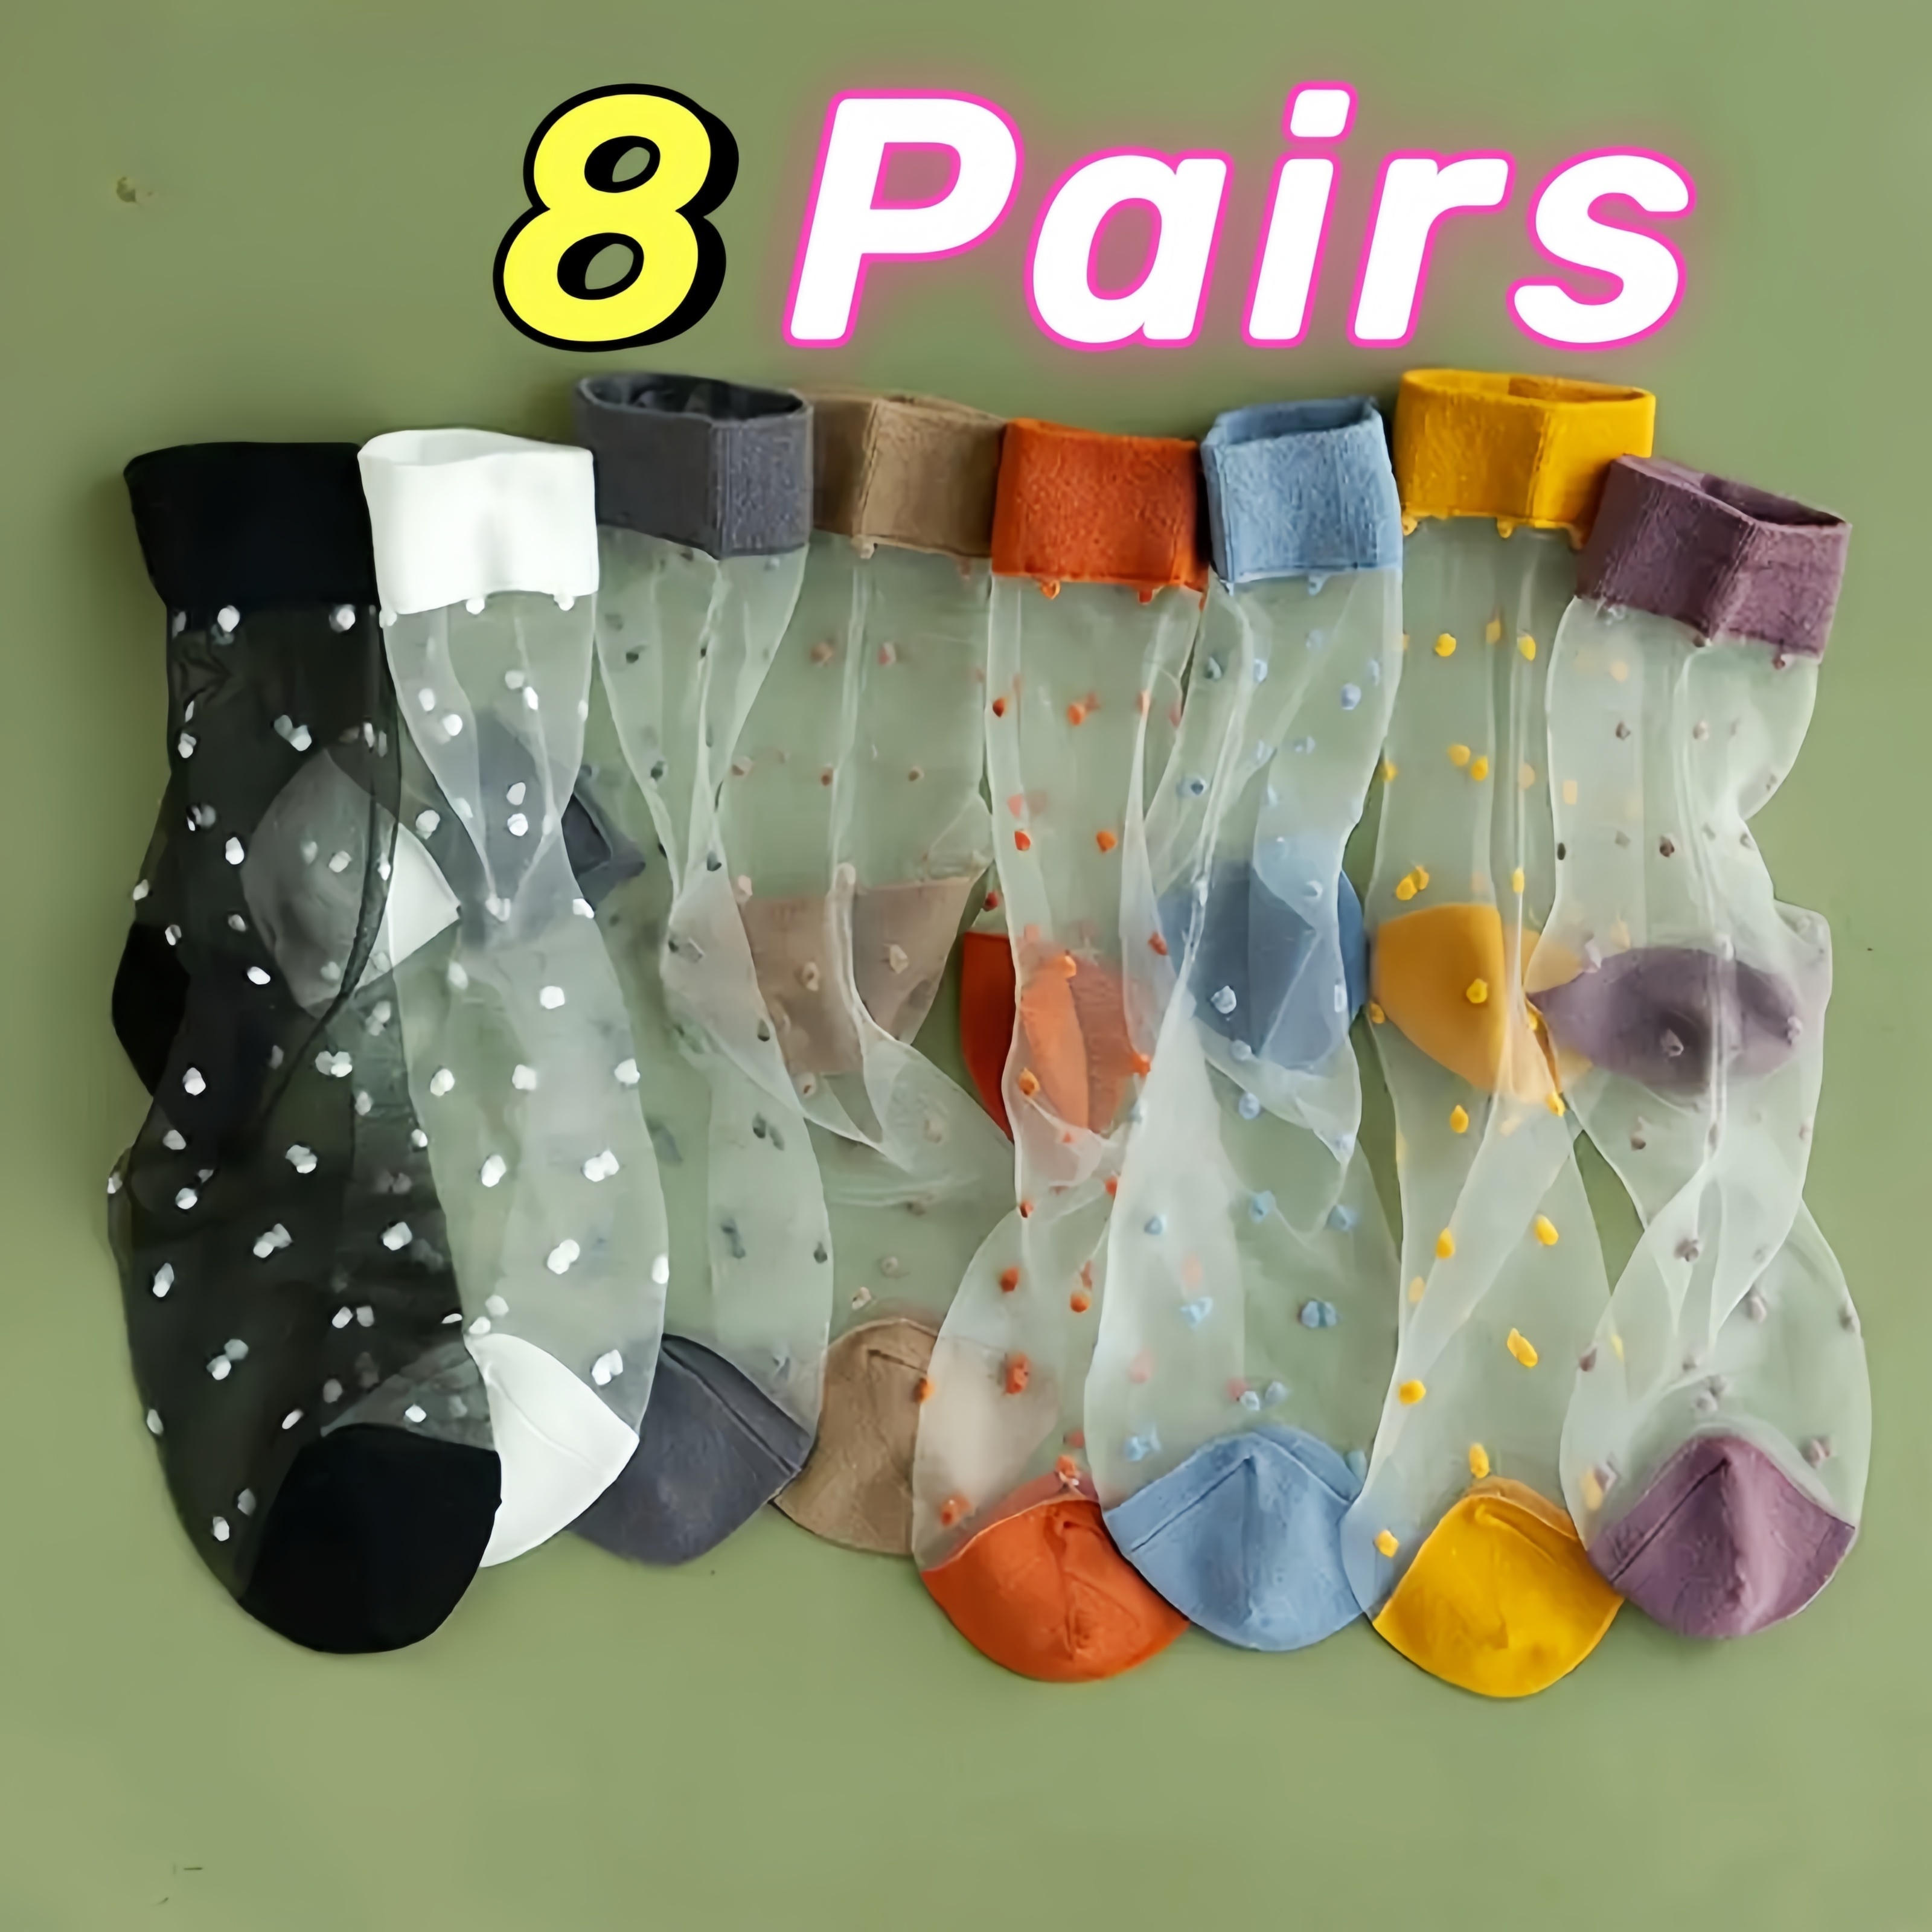 

8 Pairs Women's Sheer Mesh Socks, Mid-calf Length, Polka Dot Design With Contrasting Colors, Breathable And Comfortable For Daily Wear, Fashionable Accessory For Outfits